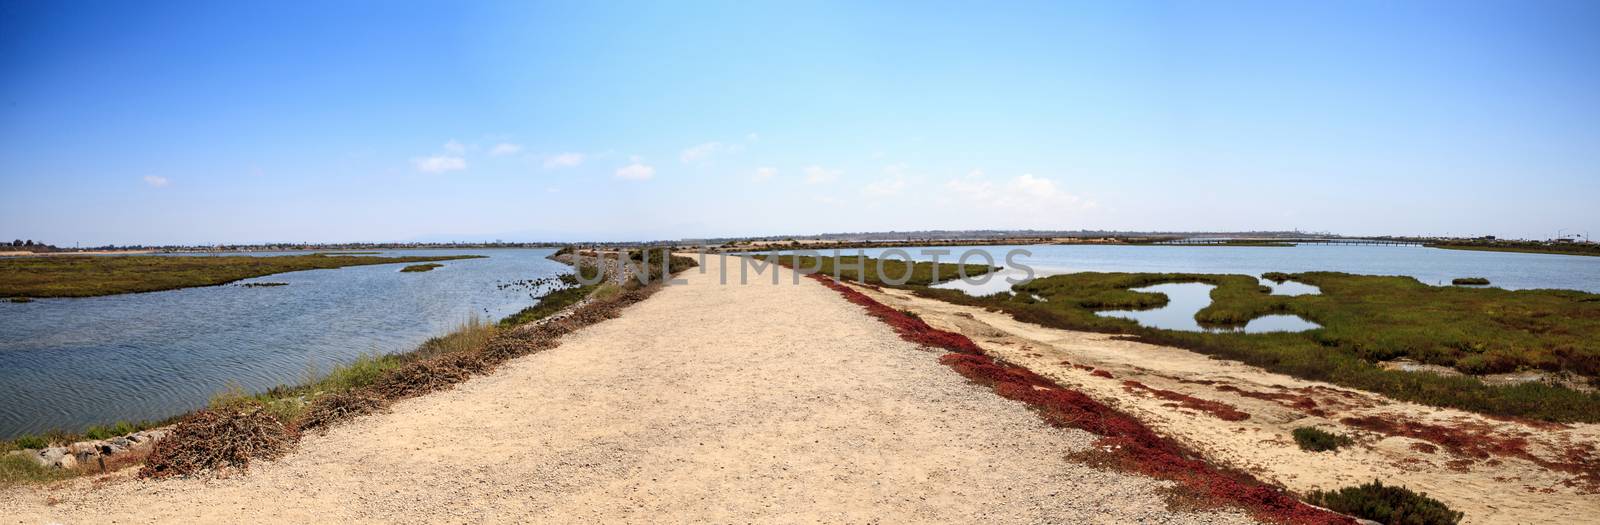 Path along the peaceful and tranquil marsh of Bolsa Chica wetlan by steffstarr